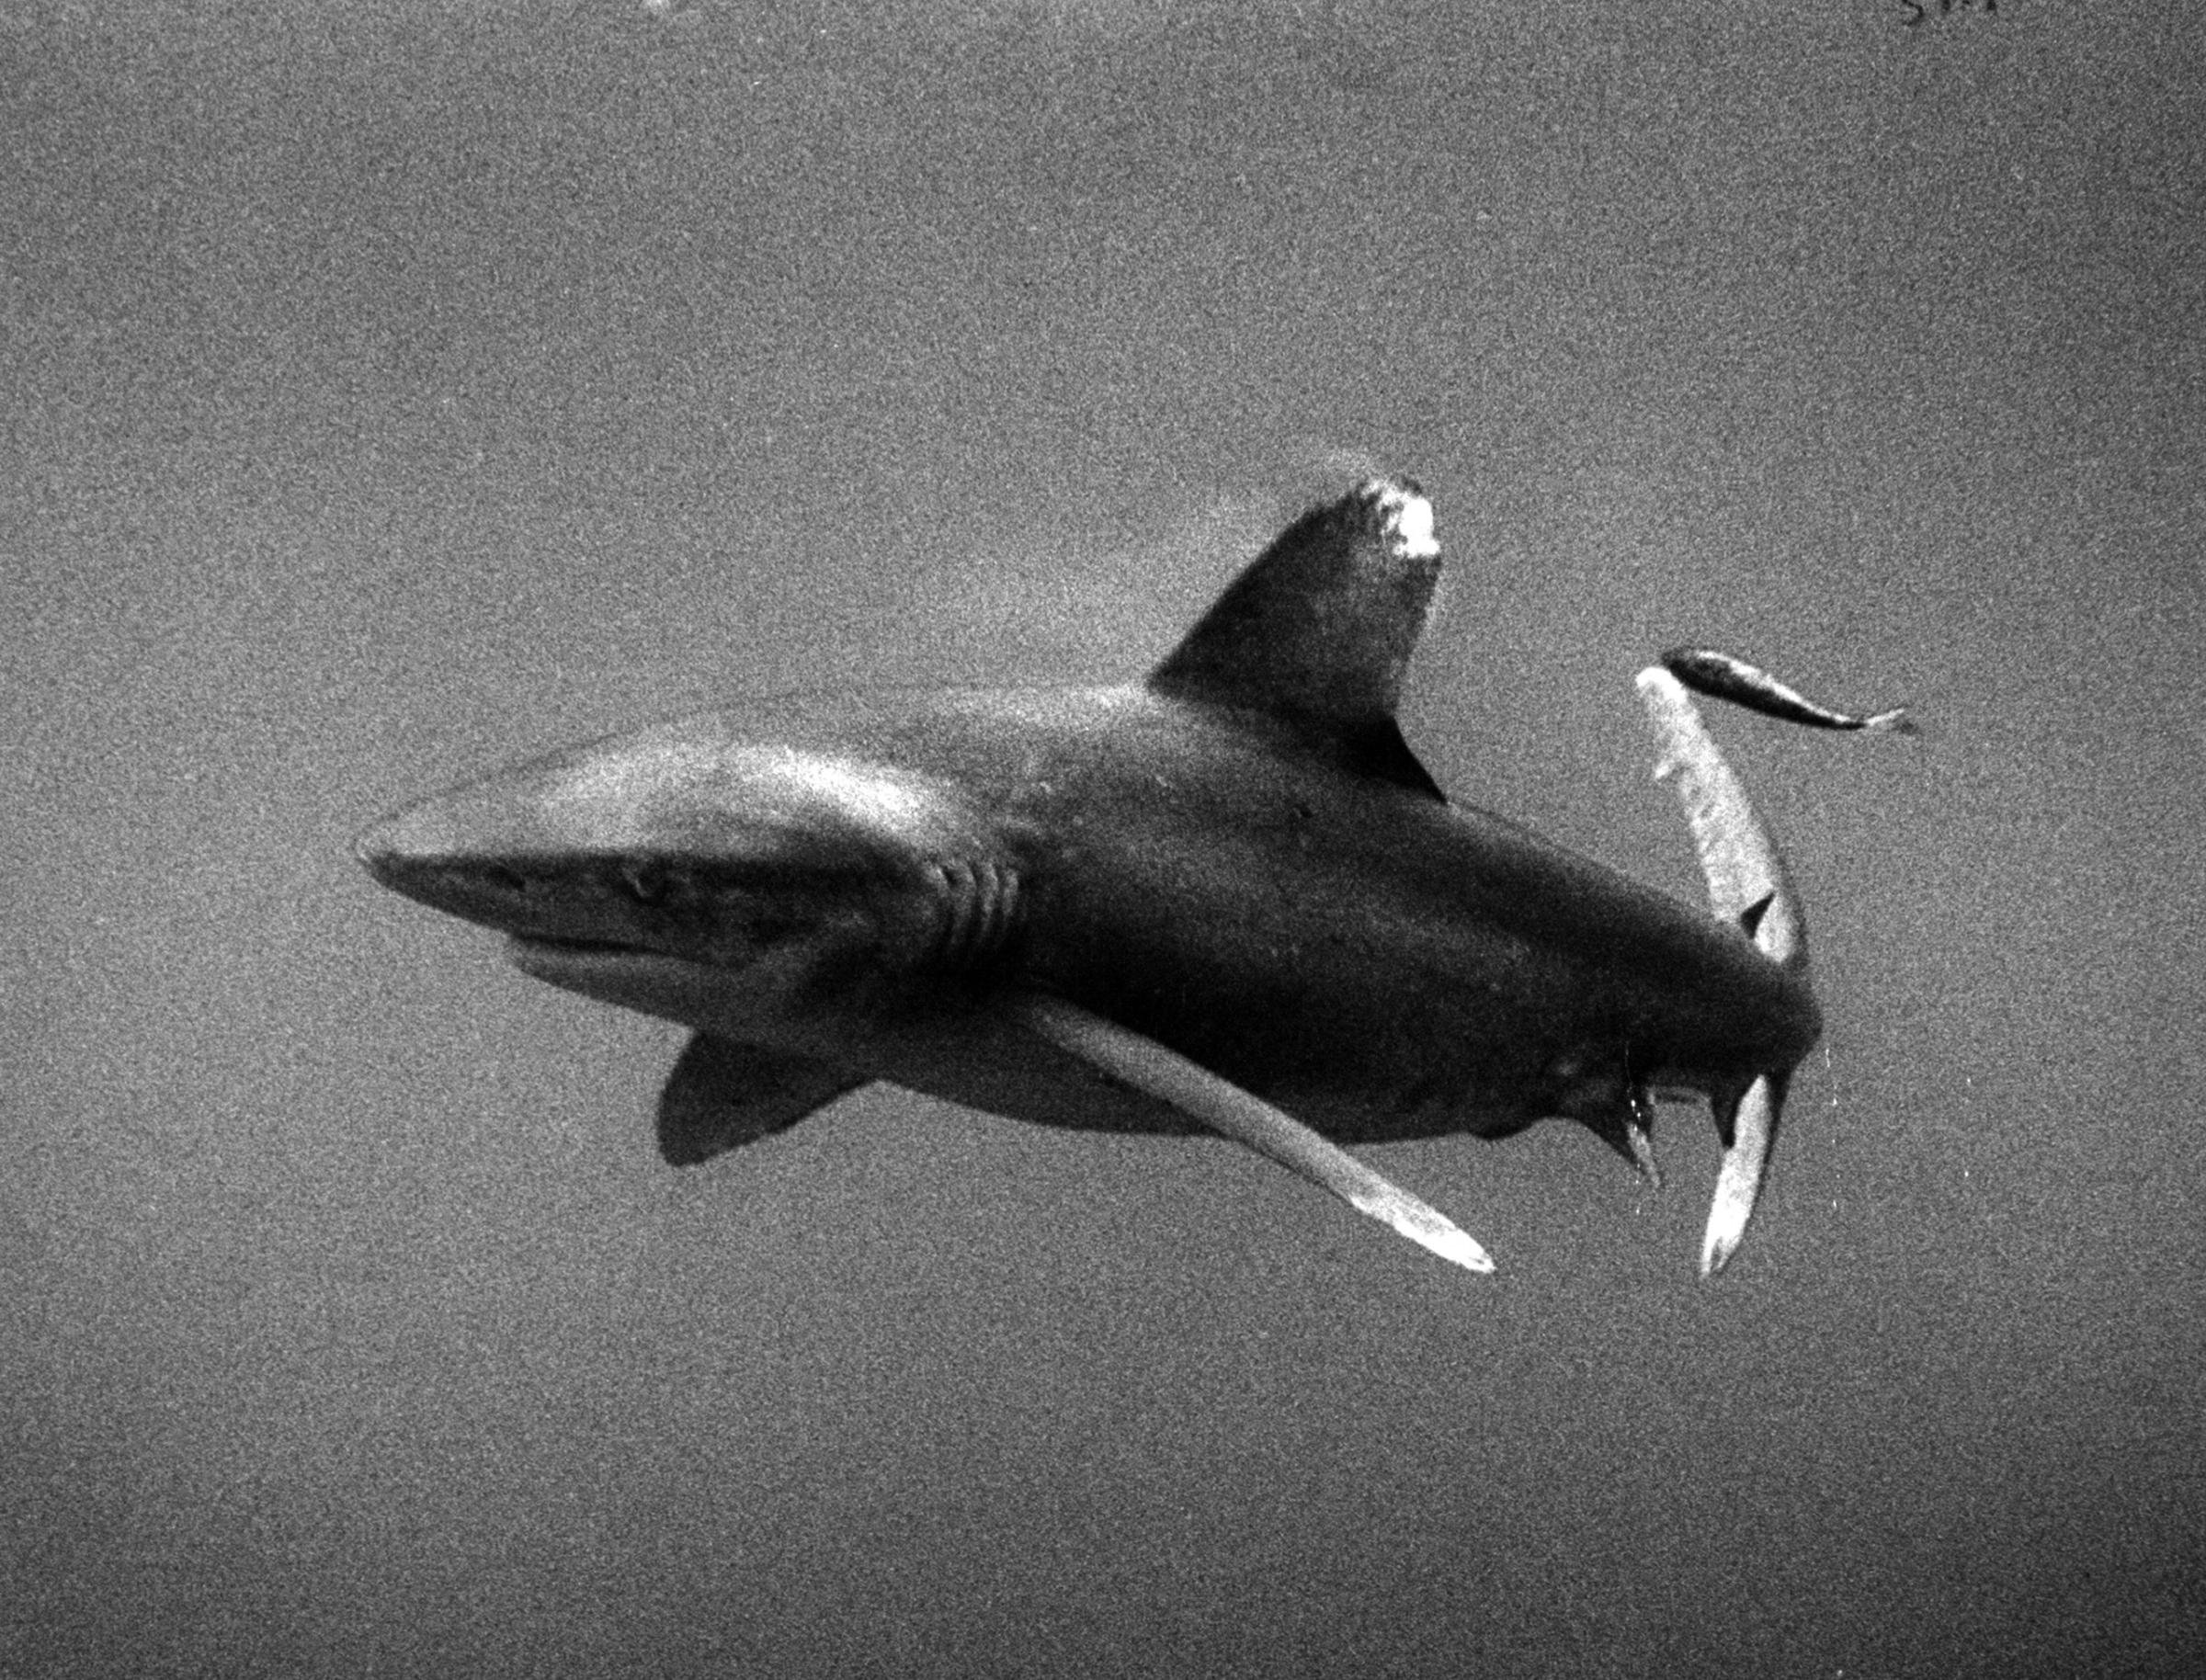 White-tip shark prowling open sea was photographed by Peter Stackpole from cage sunk in Gulf of Mexico. White-tips stay at sea, do not molest beaches.